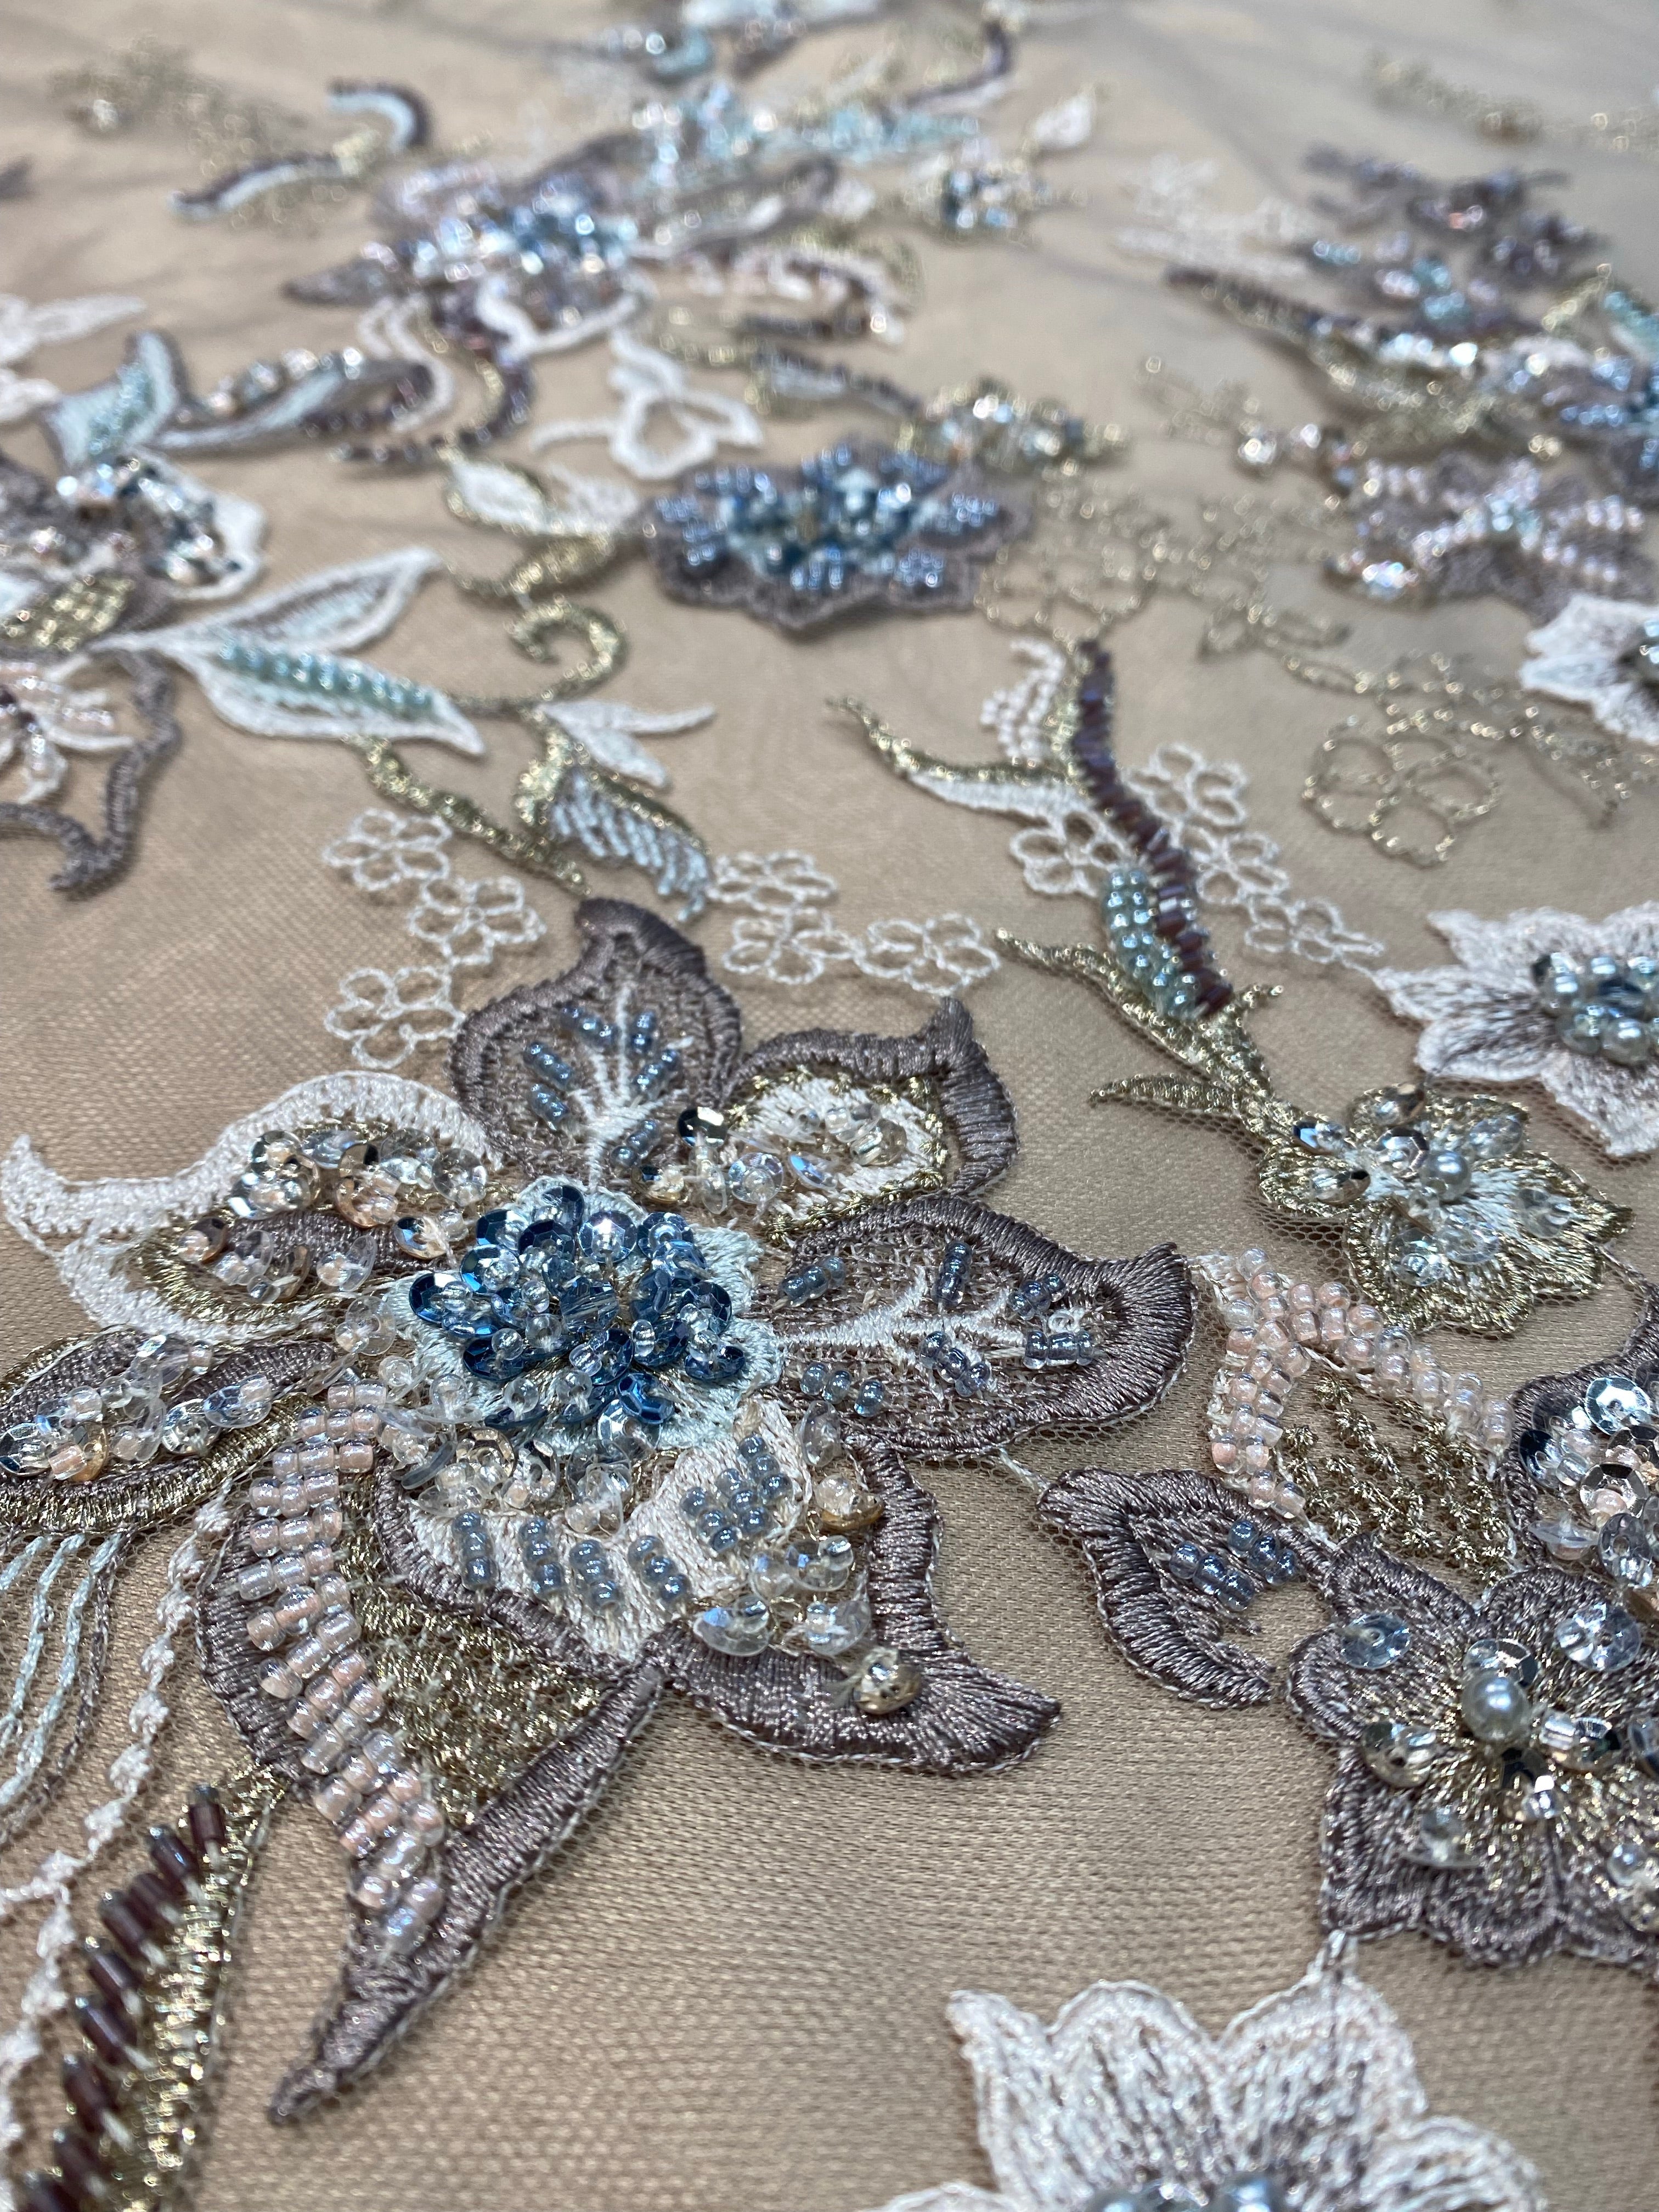 Short pieces of lace 2.45 meters